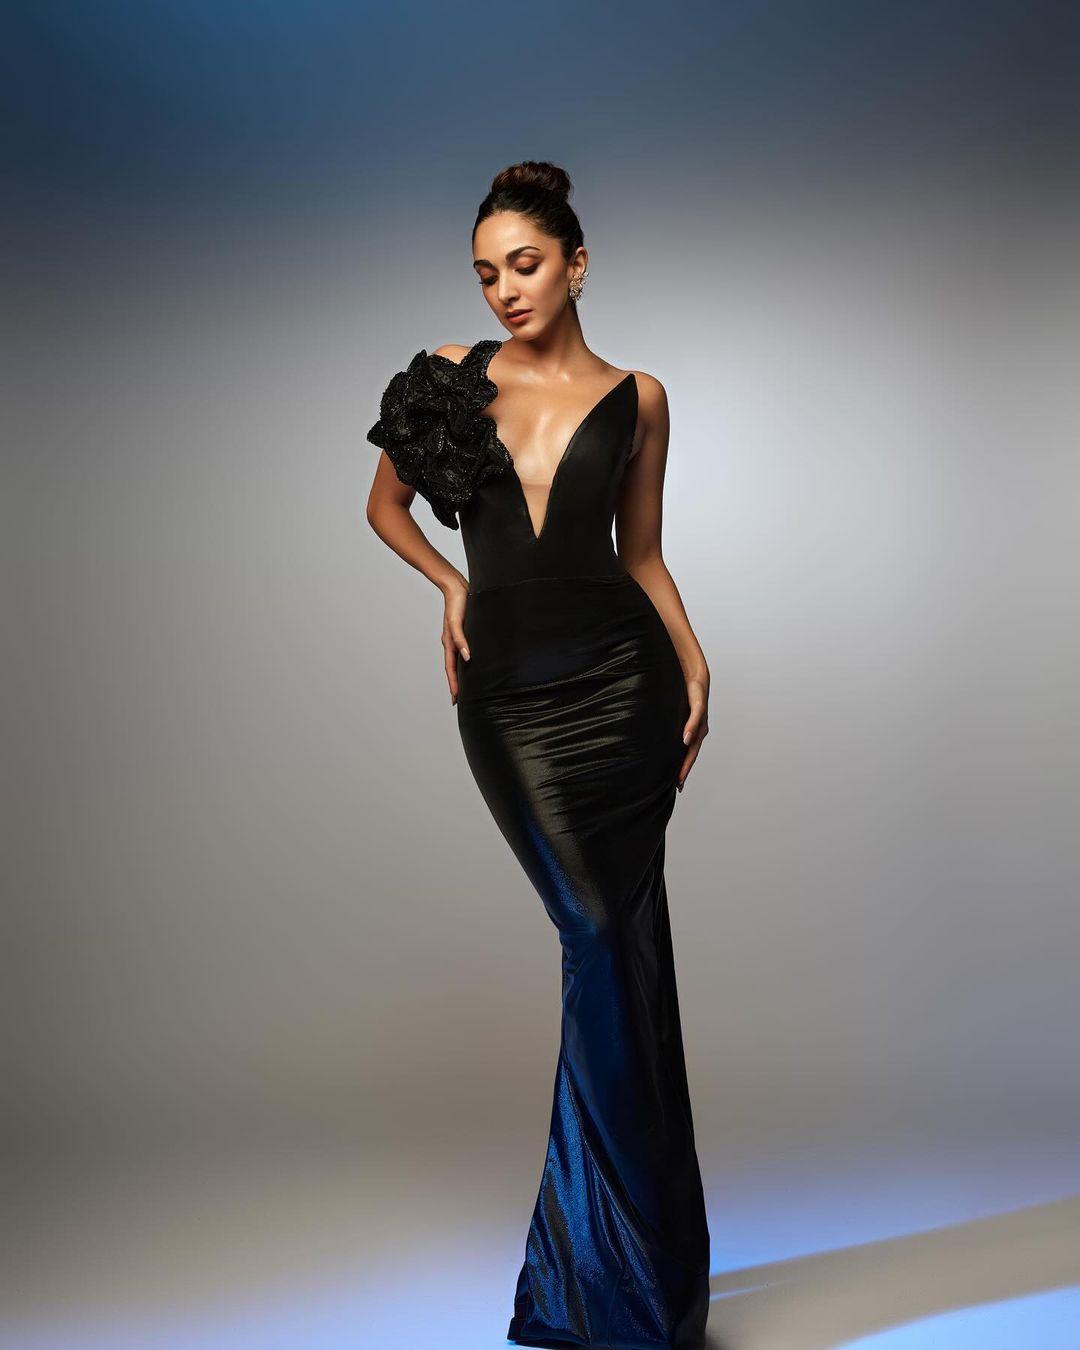 Kiara Advani wowed in a sleek black bodycon gown featuring a deep neckline and a large 3D flower on the shoulder